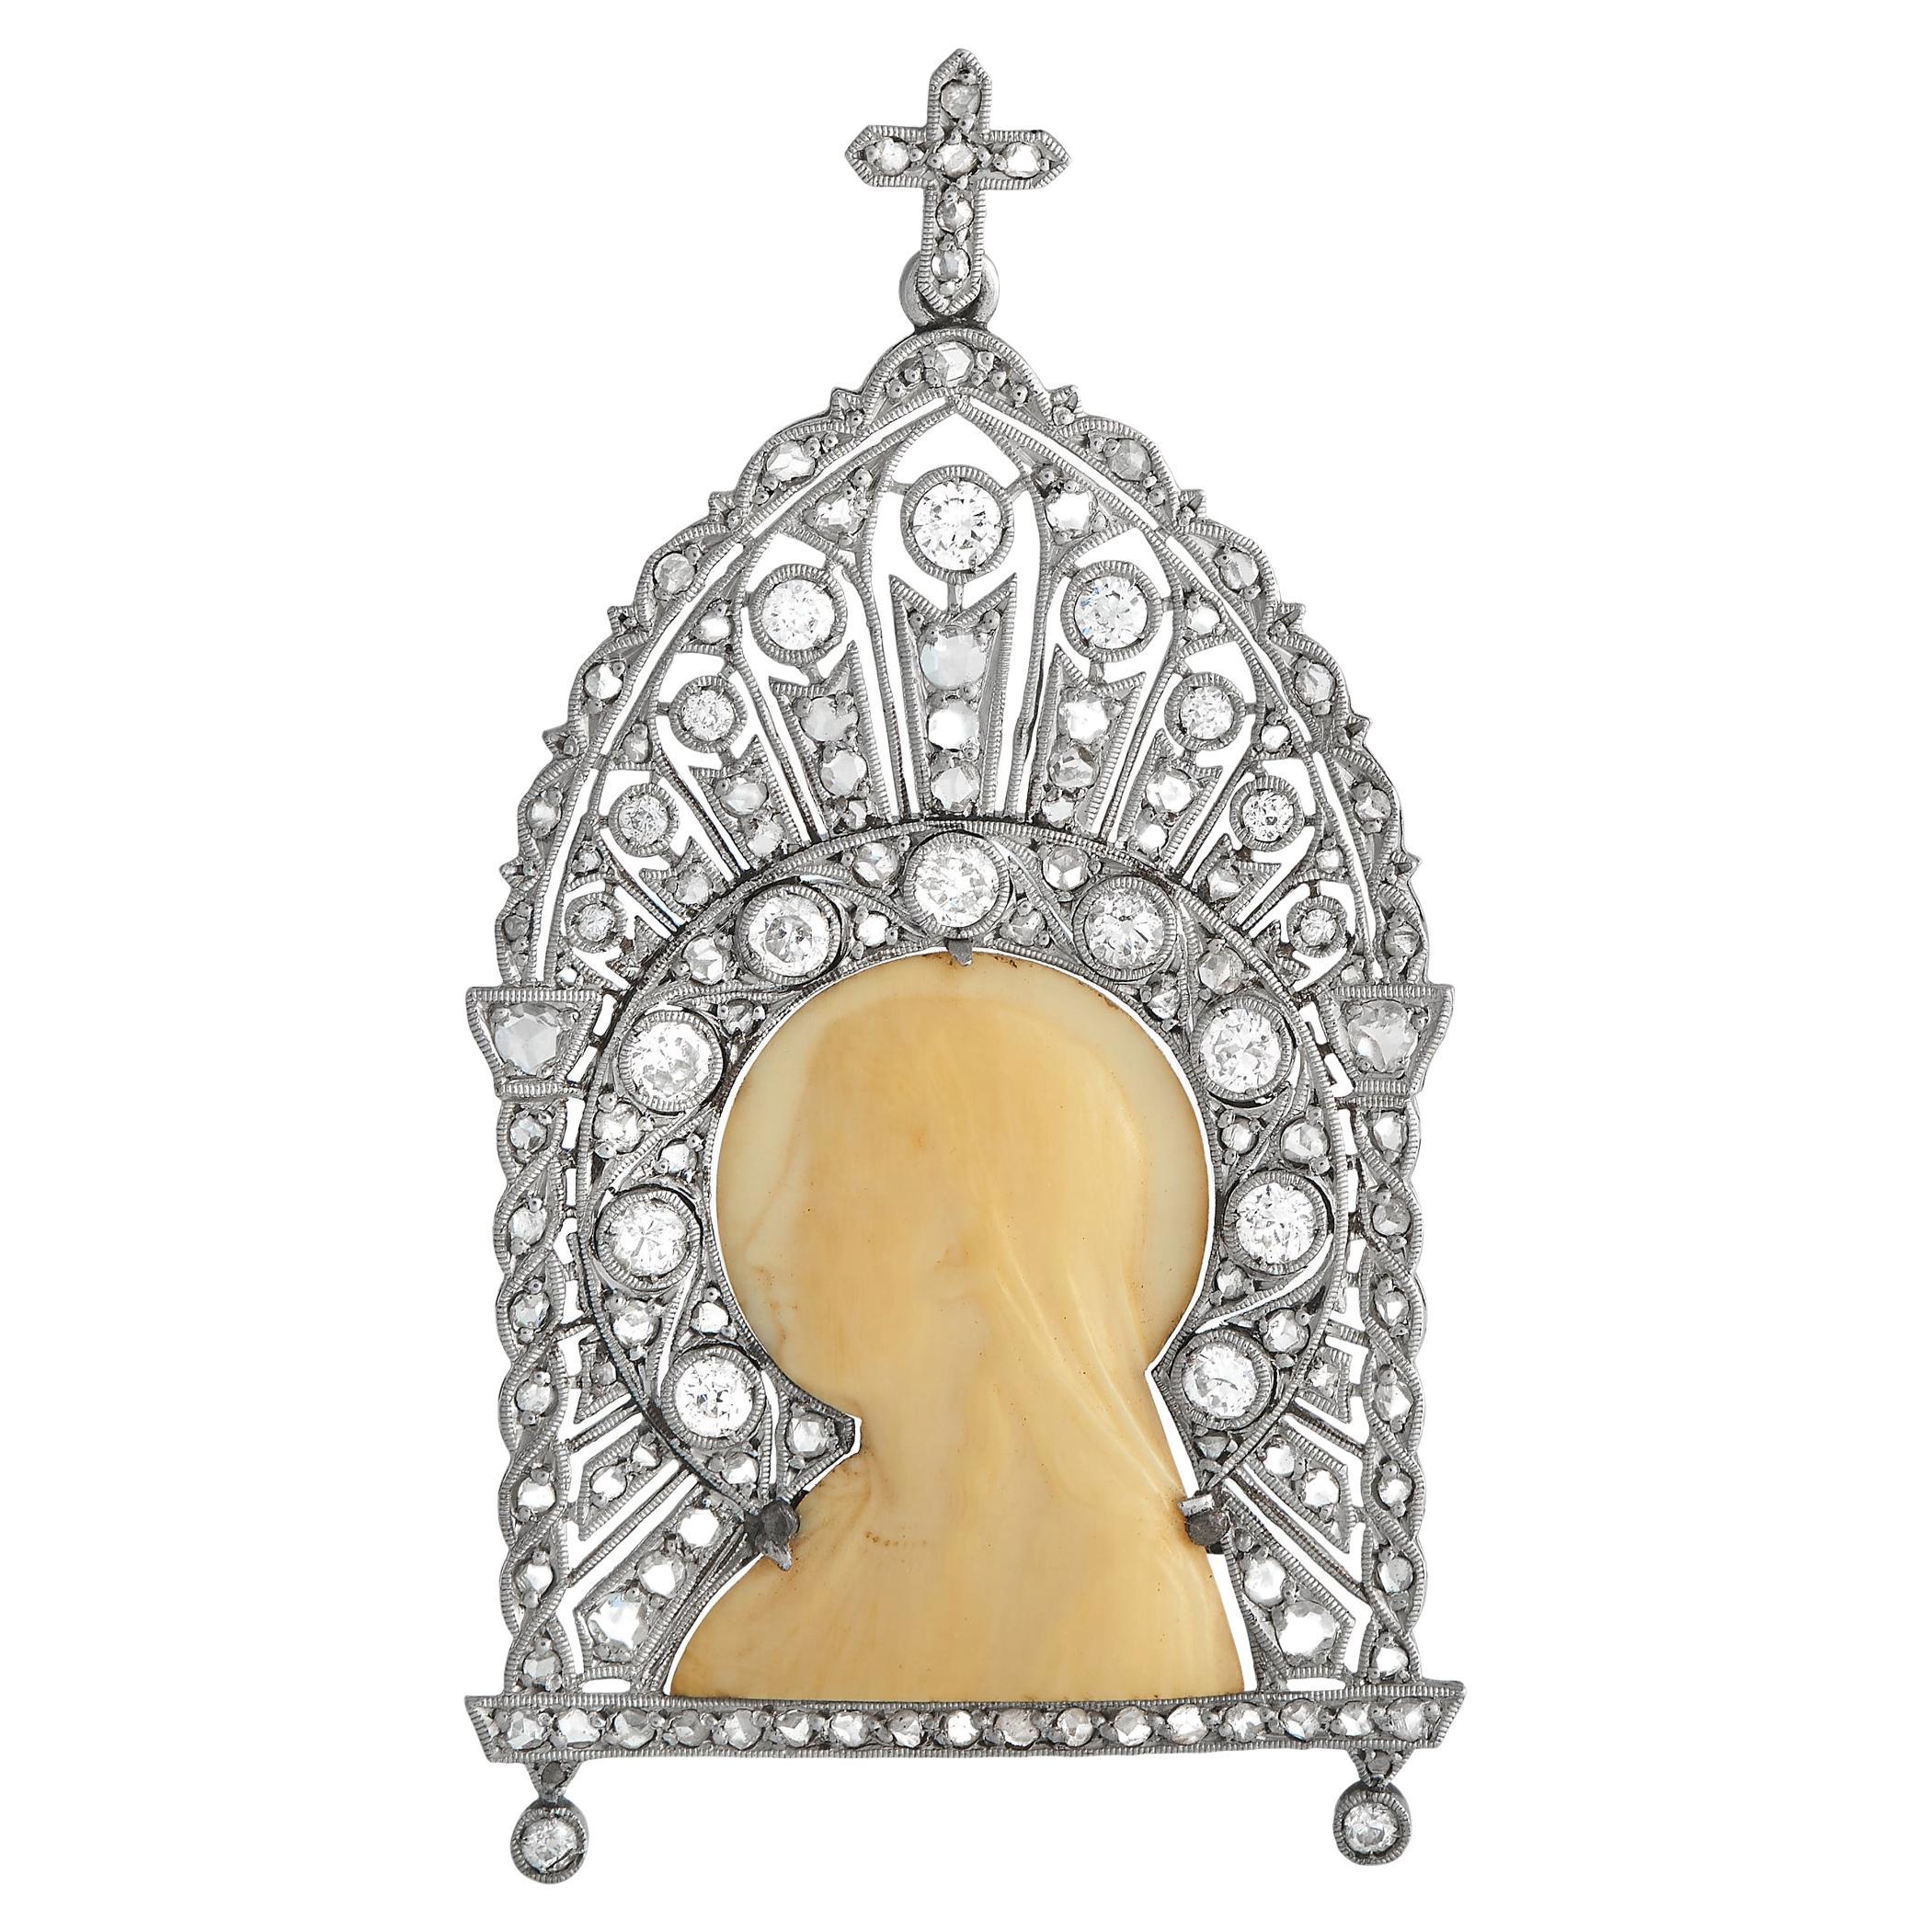 LB Exclusive Art Deco Platinum 2.25ct Diamond and Carved Stone St. Mary Pendant